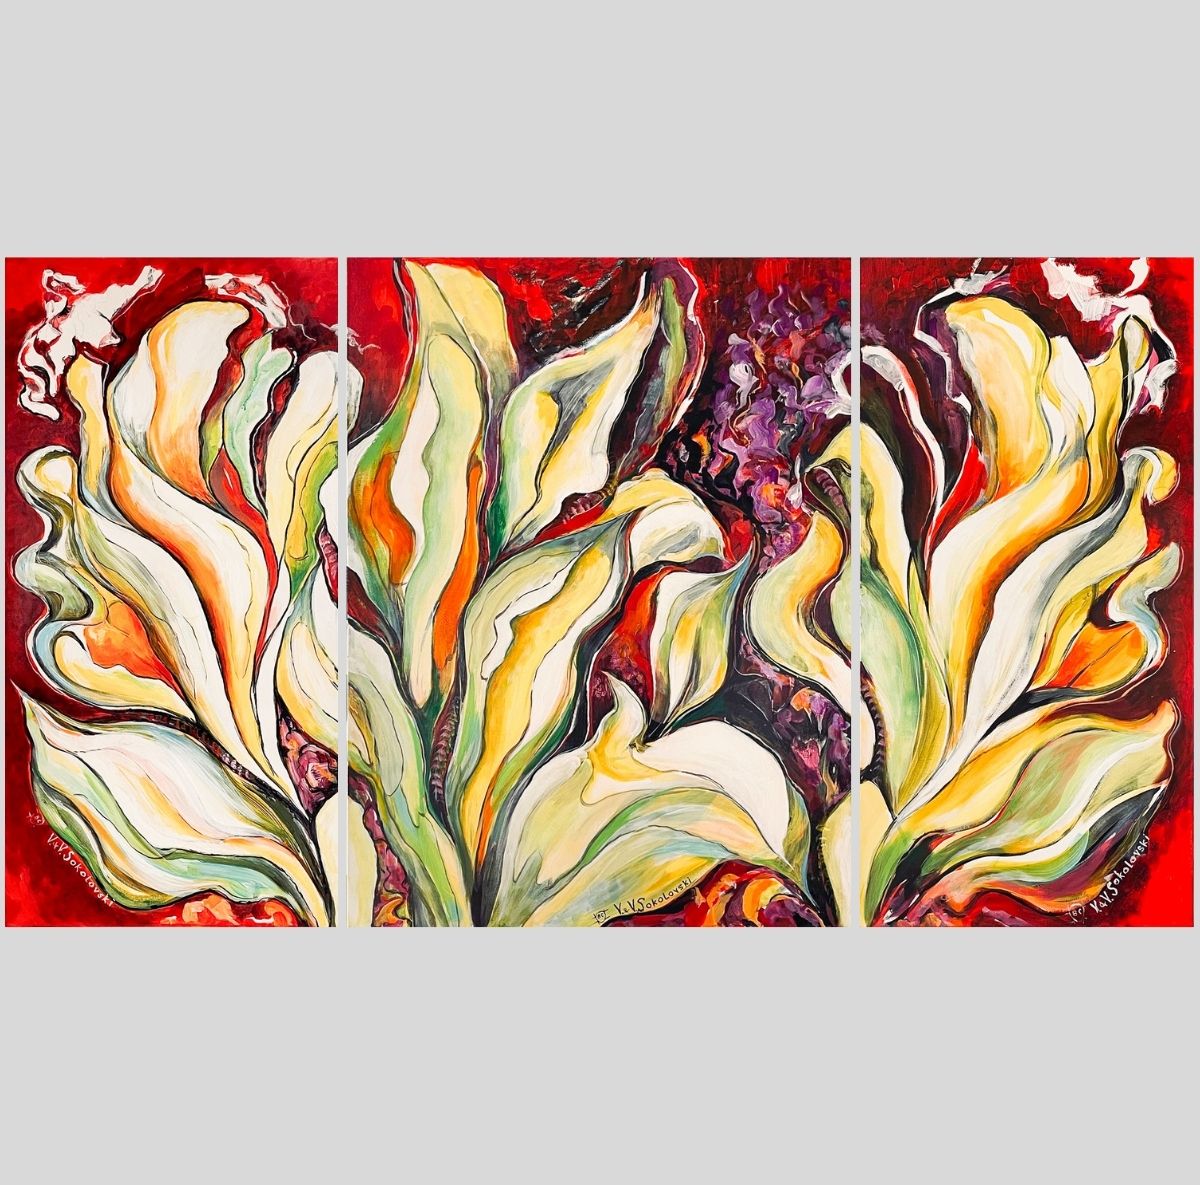 Contemporary Art. Title: Island Flowers -Acrylic on canvas-Triptych 48x24/2, 48x36/1 in by Contemporary Canadian artist Valeri Sokolovski.